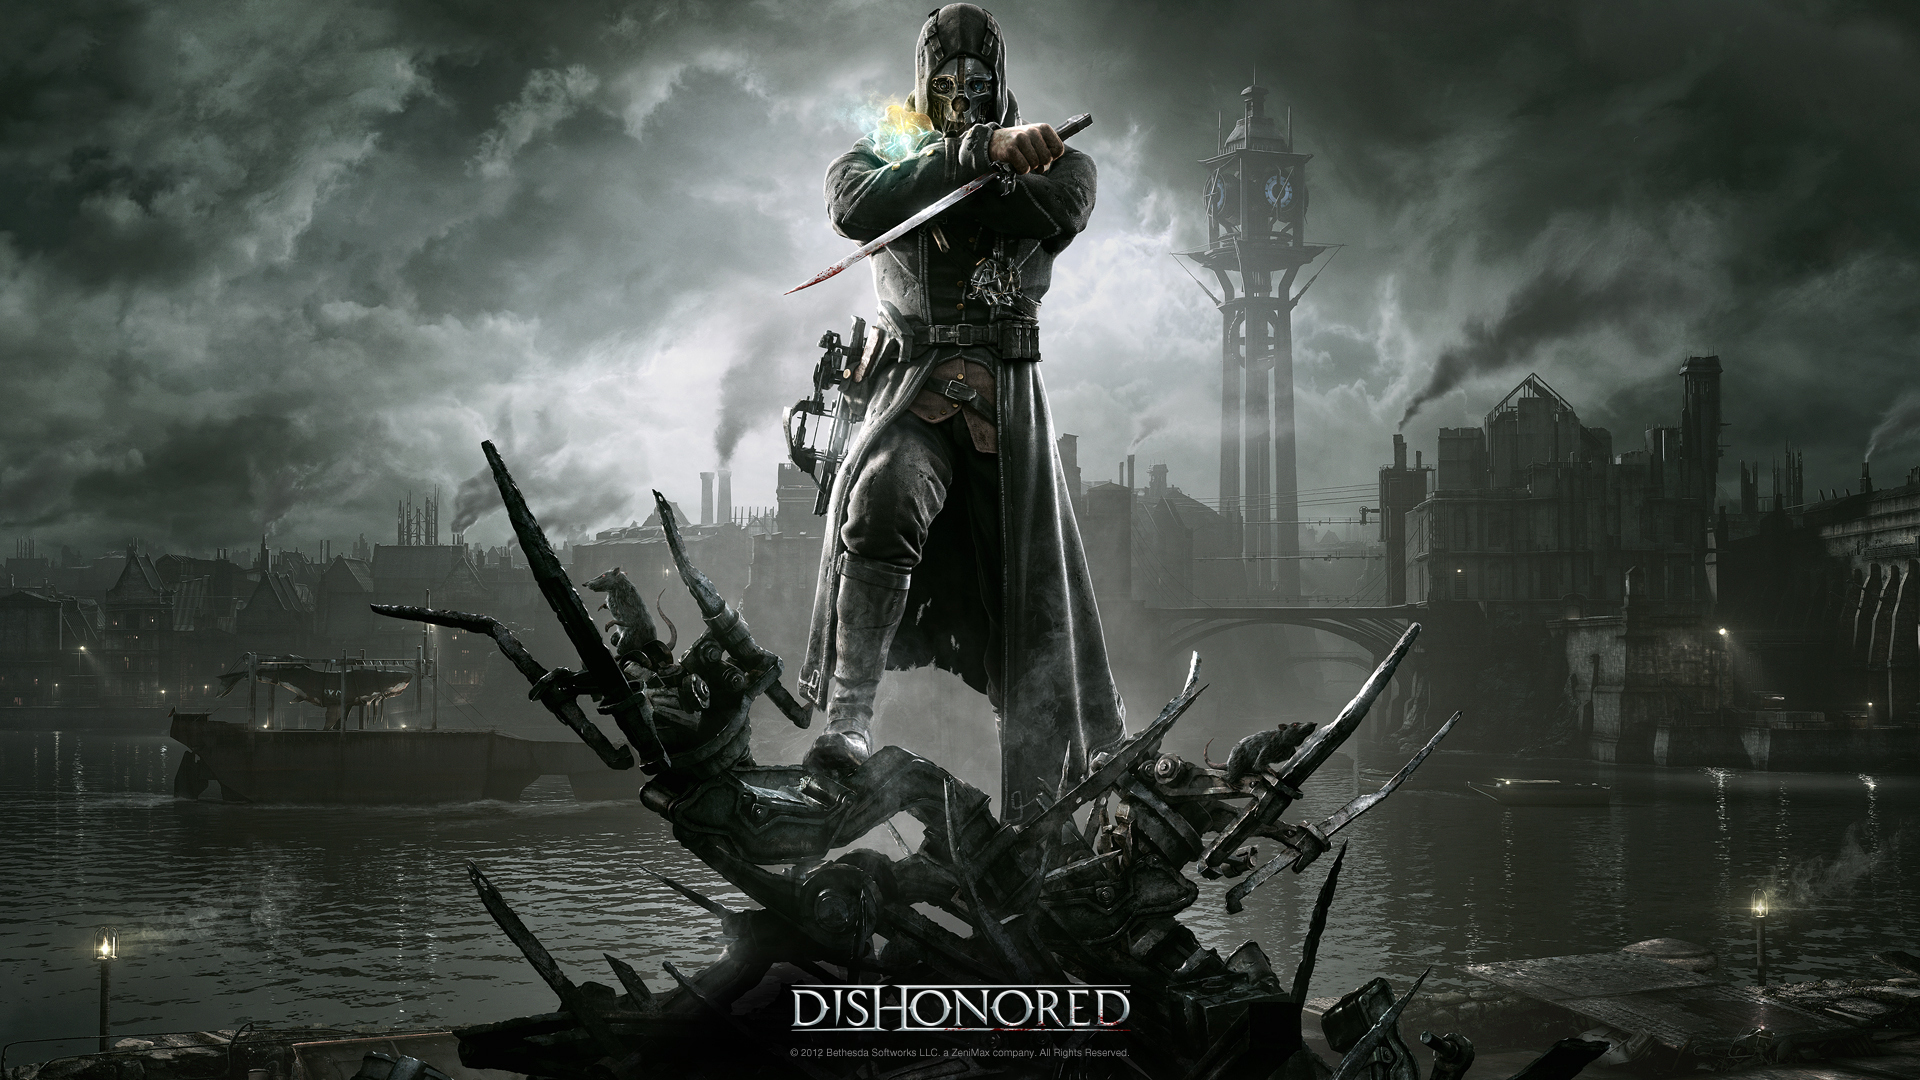 If You Like Dishonored, You Might Enjoy . . . Den of Geek